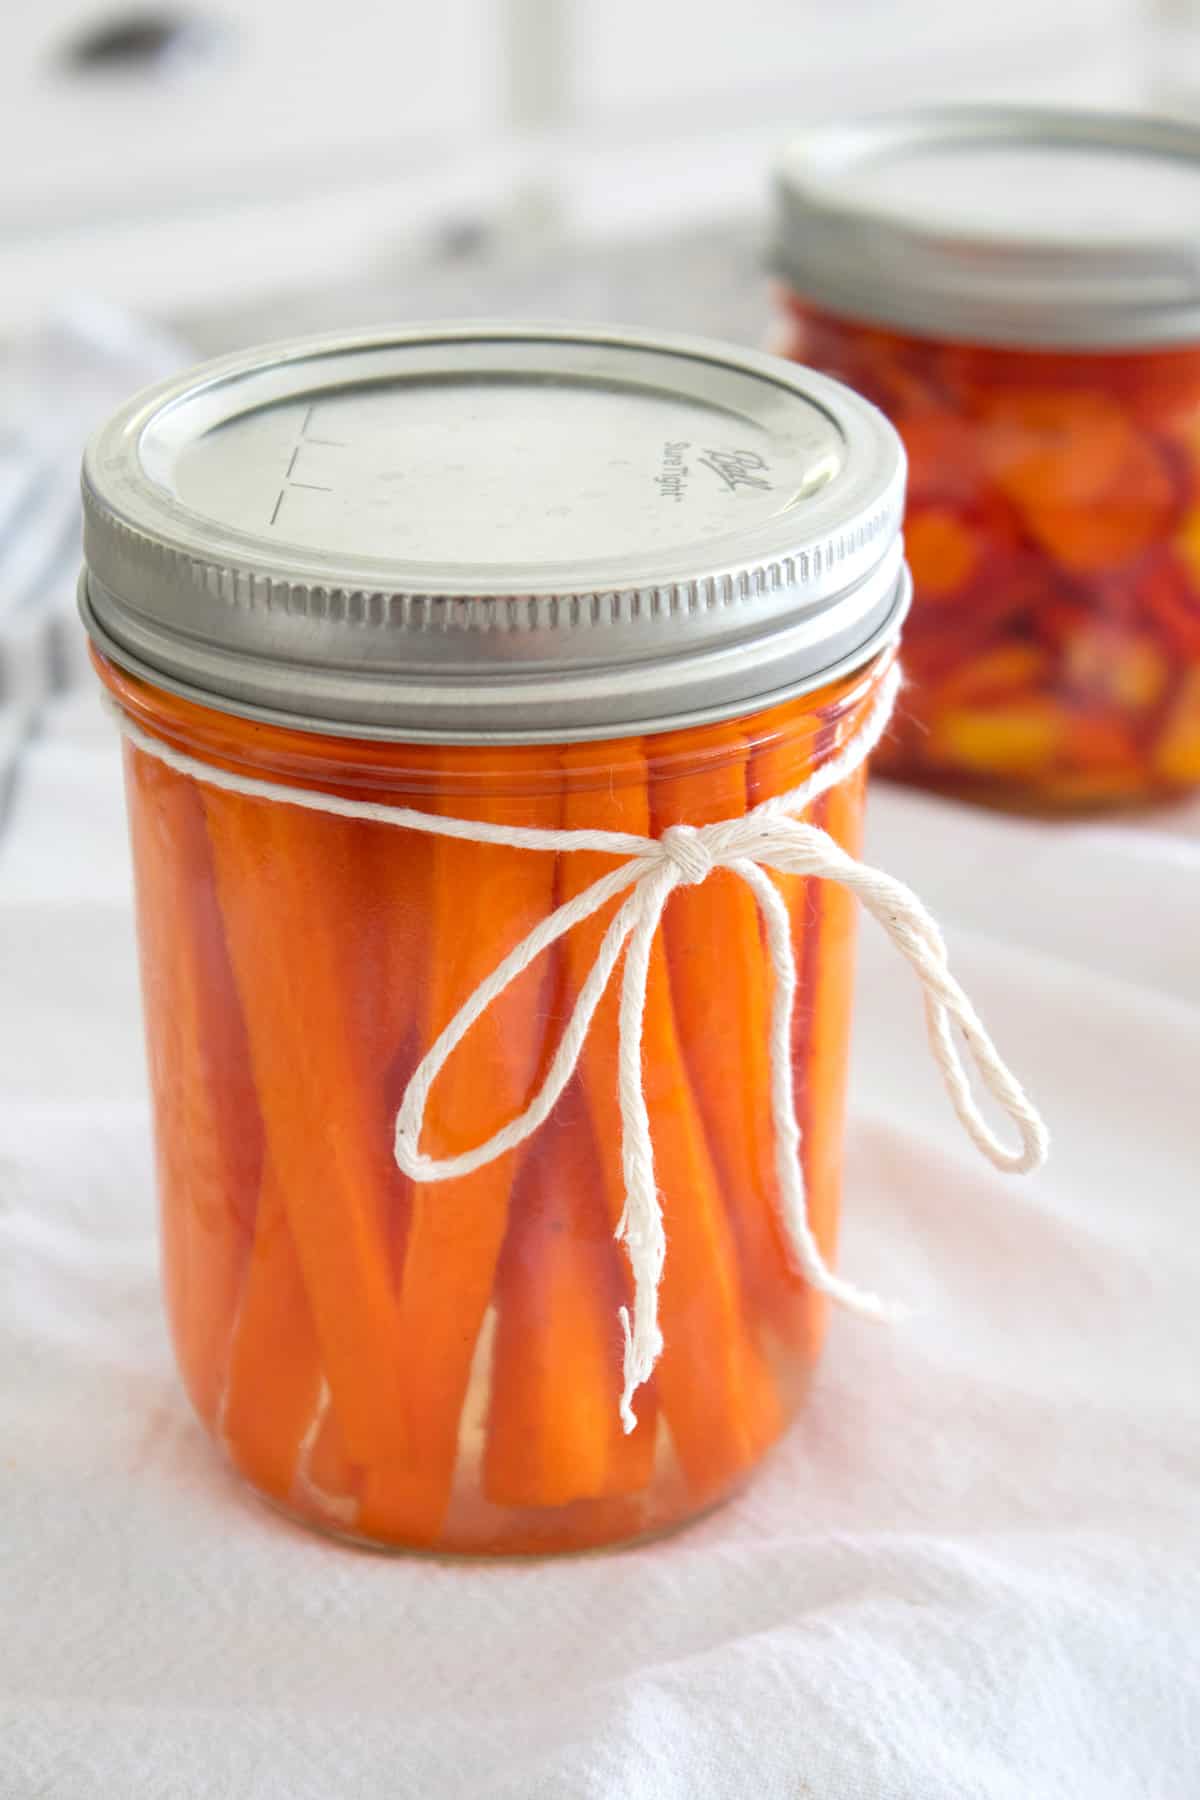 mason jar full of pickled carrots tied with twine